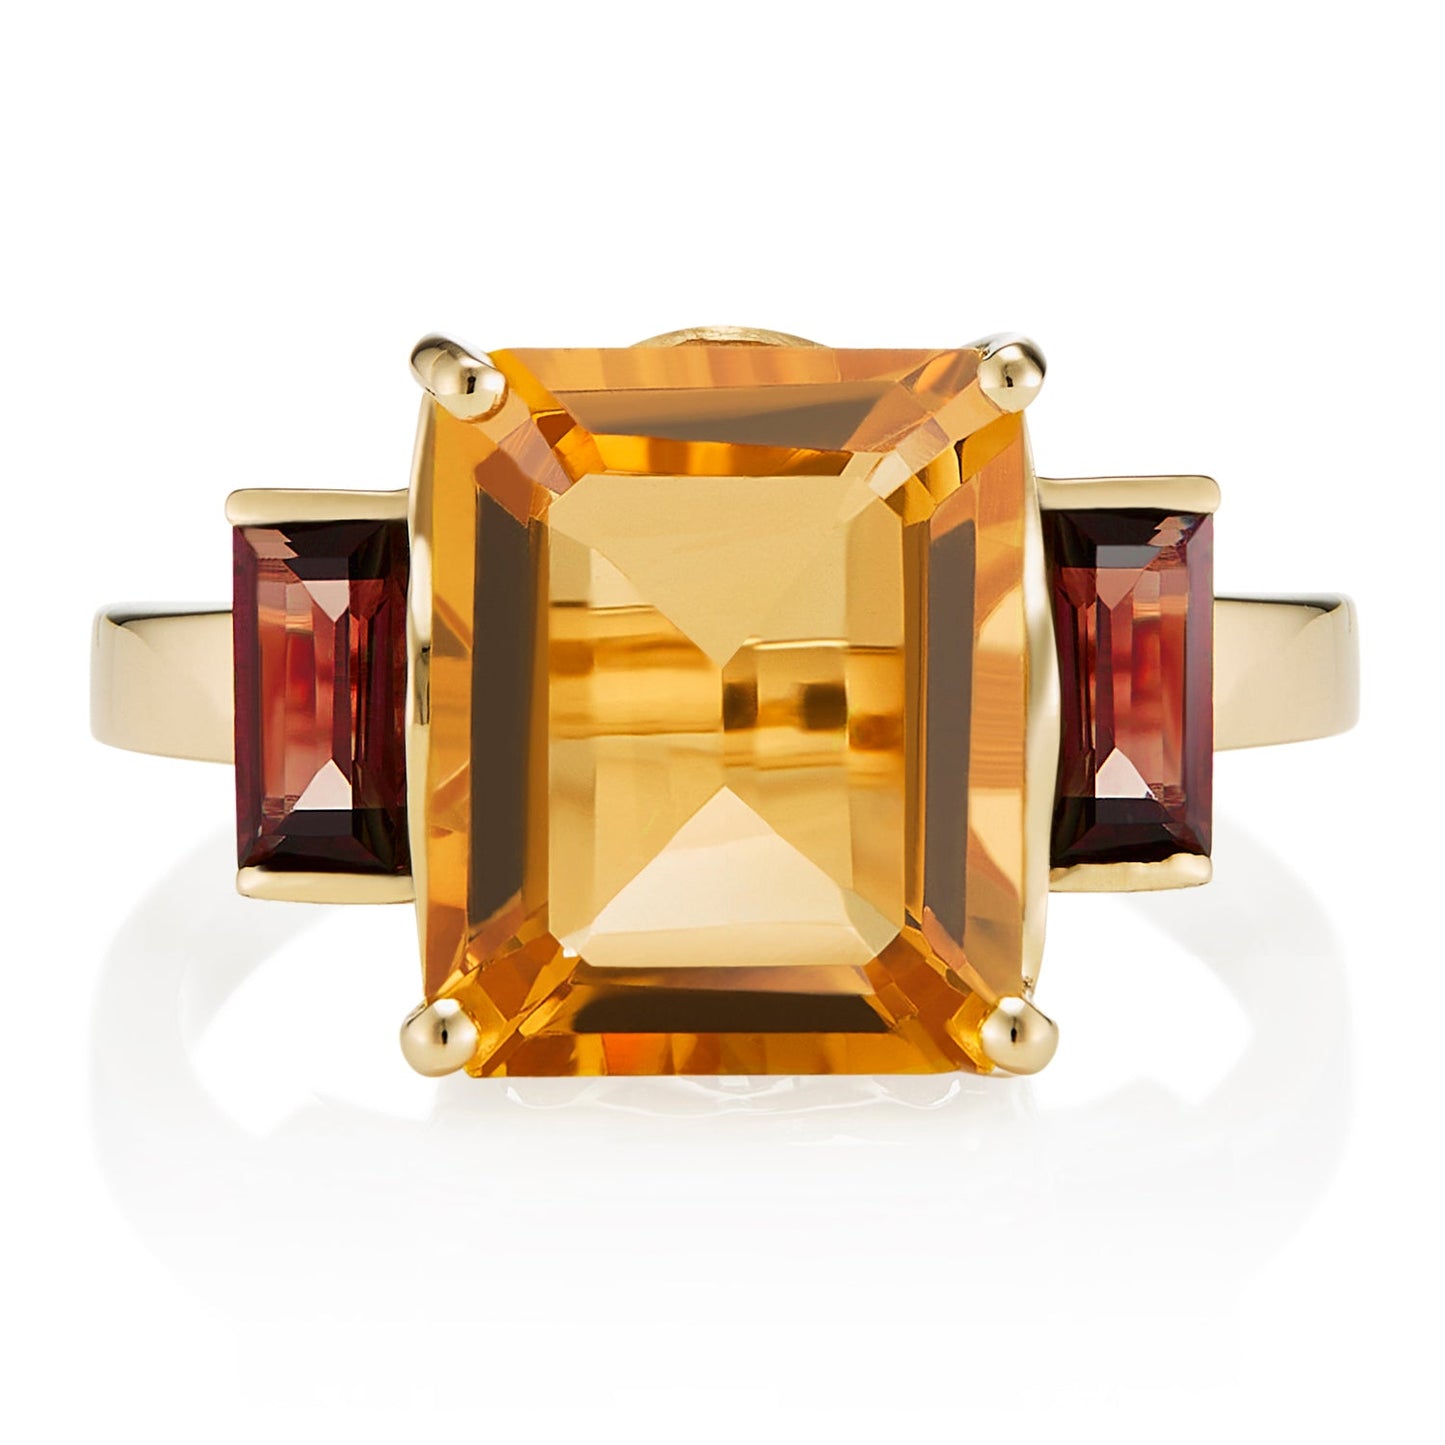 Load image into Gallery viewer, London- made luxury custom gold jewellery -9ct Yellow Gold Octagon Ring in Garnet and Citrine – Andalusian Collection, Augustine Jewellery, British Jewellers, Gemstone Jewellery, Luxury Jewellery London.
